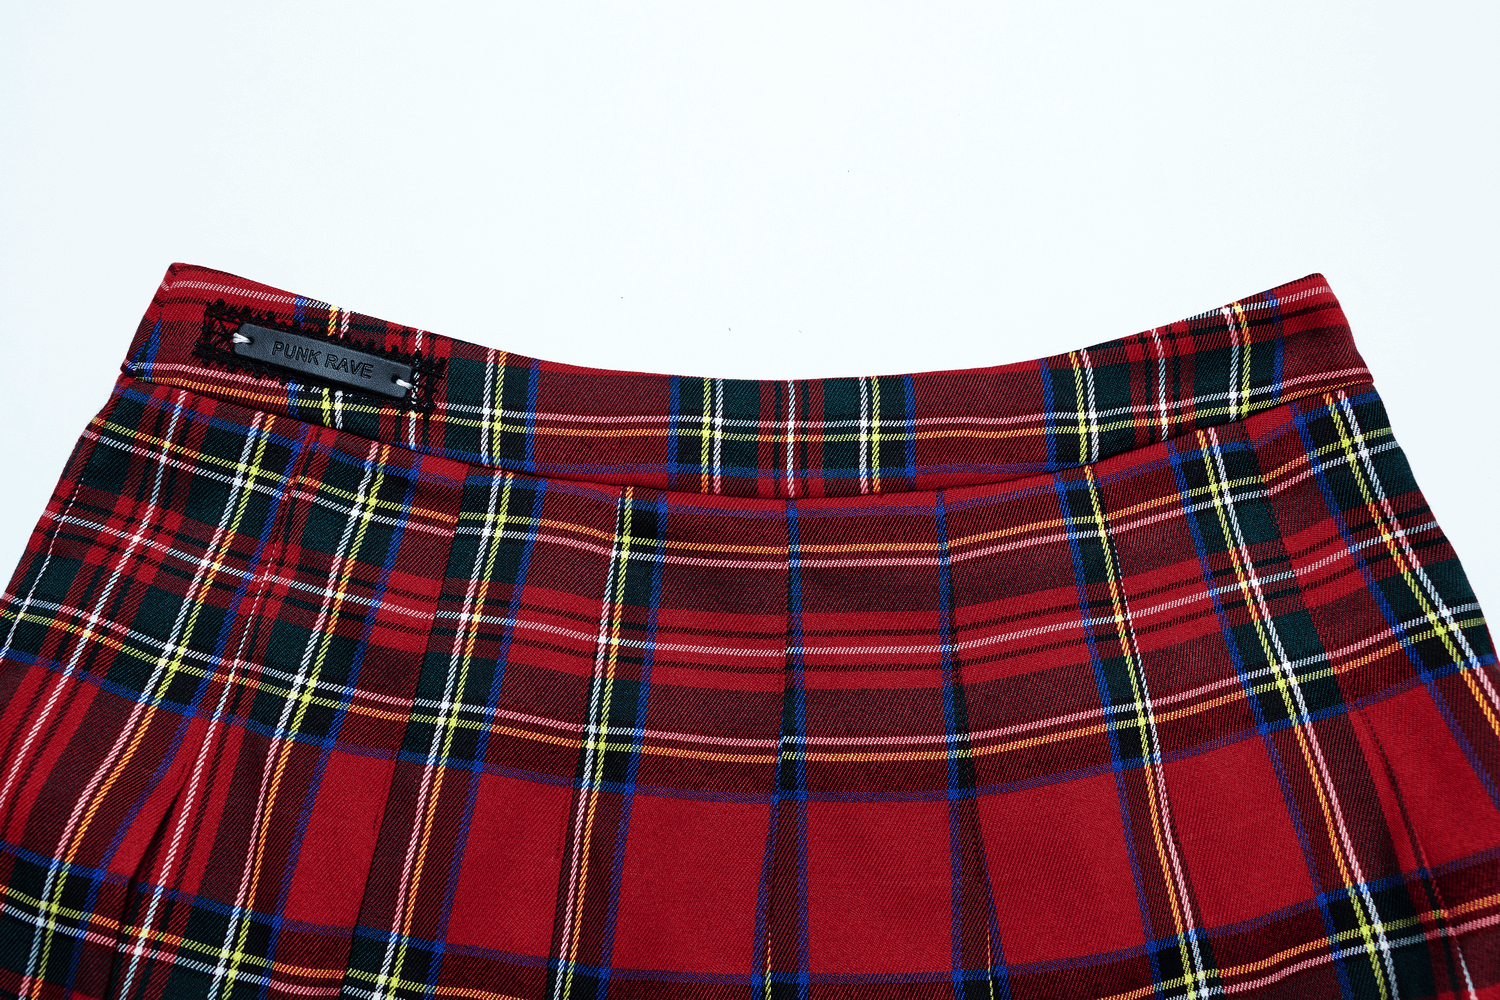 Red Tartan Gothic Skirt with Pleats and Belt Detail